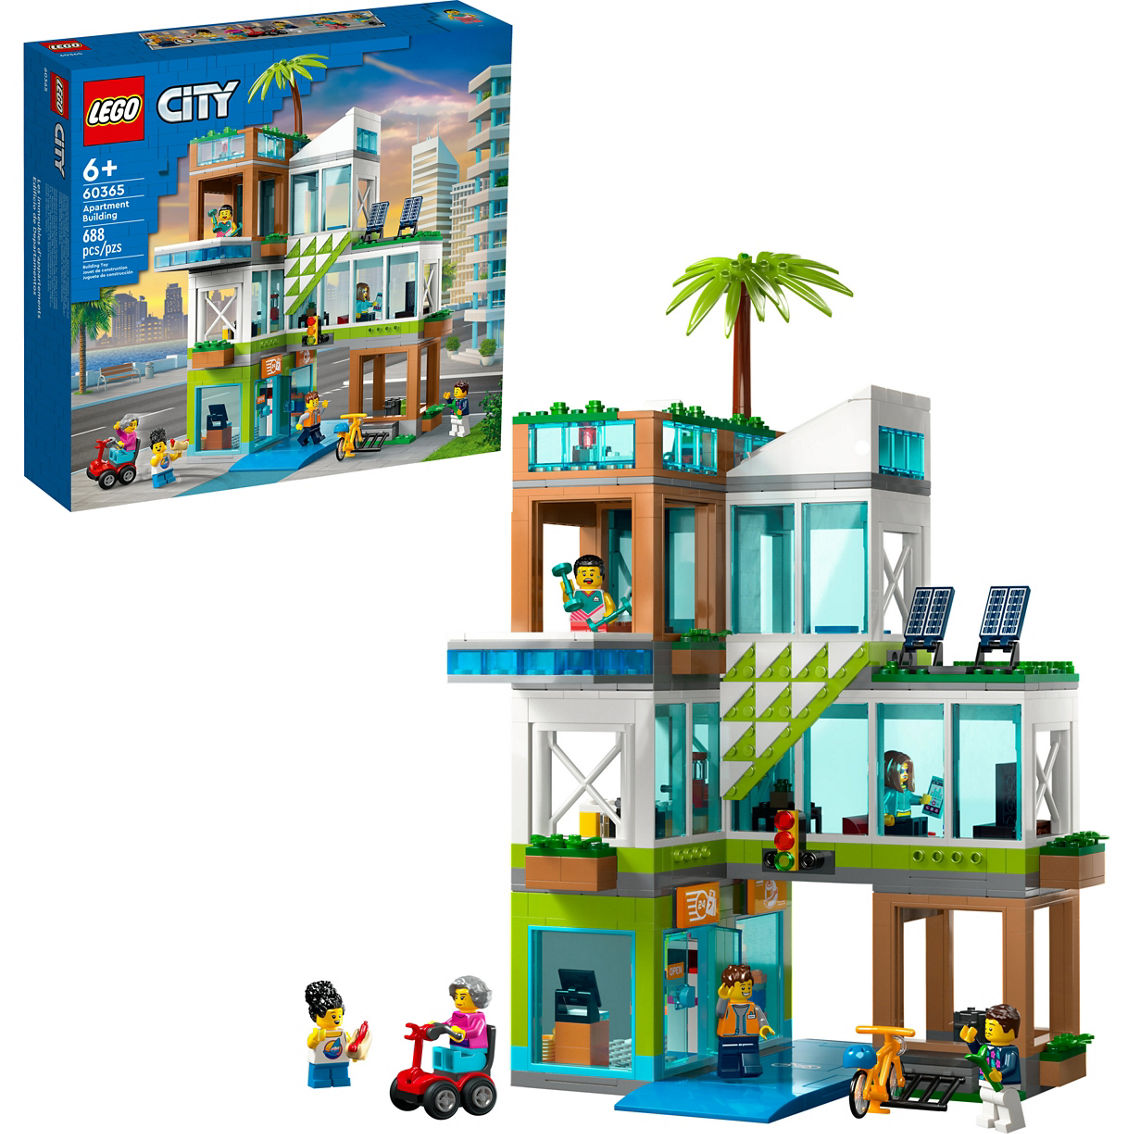 LEGO My City Apartment Building 60365 - Image 3 of 10